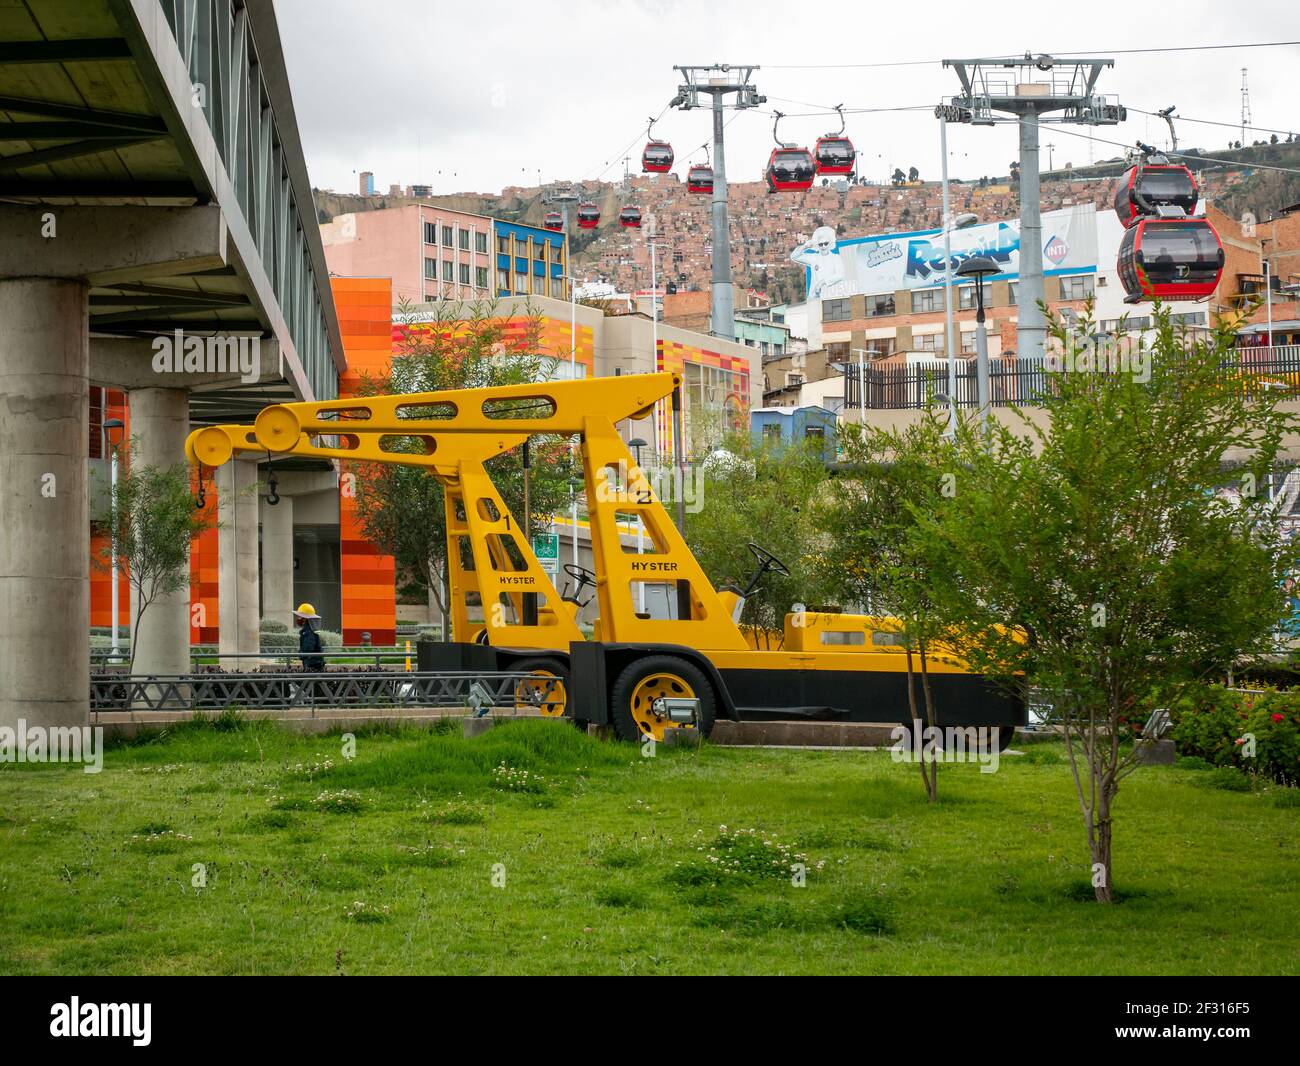 La Paz, Bolivia - February 11 2021: Antique Crane Painted Yellow Restored and Preserved as an Antique at Central Station Stock Photo